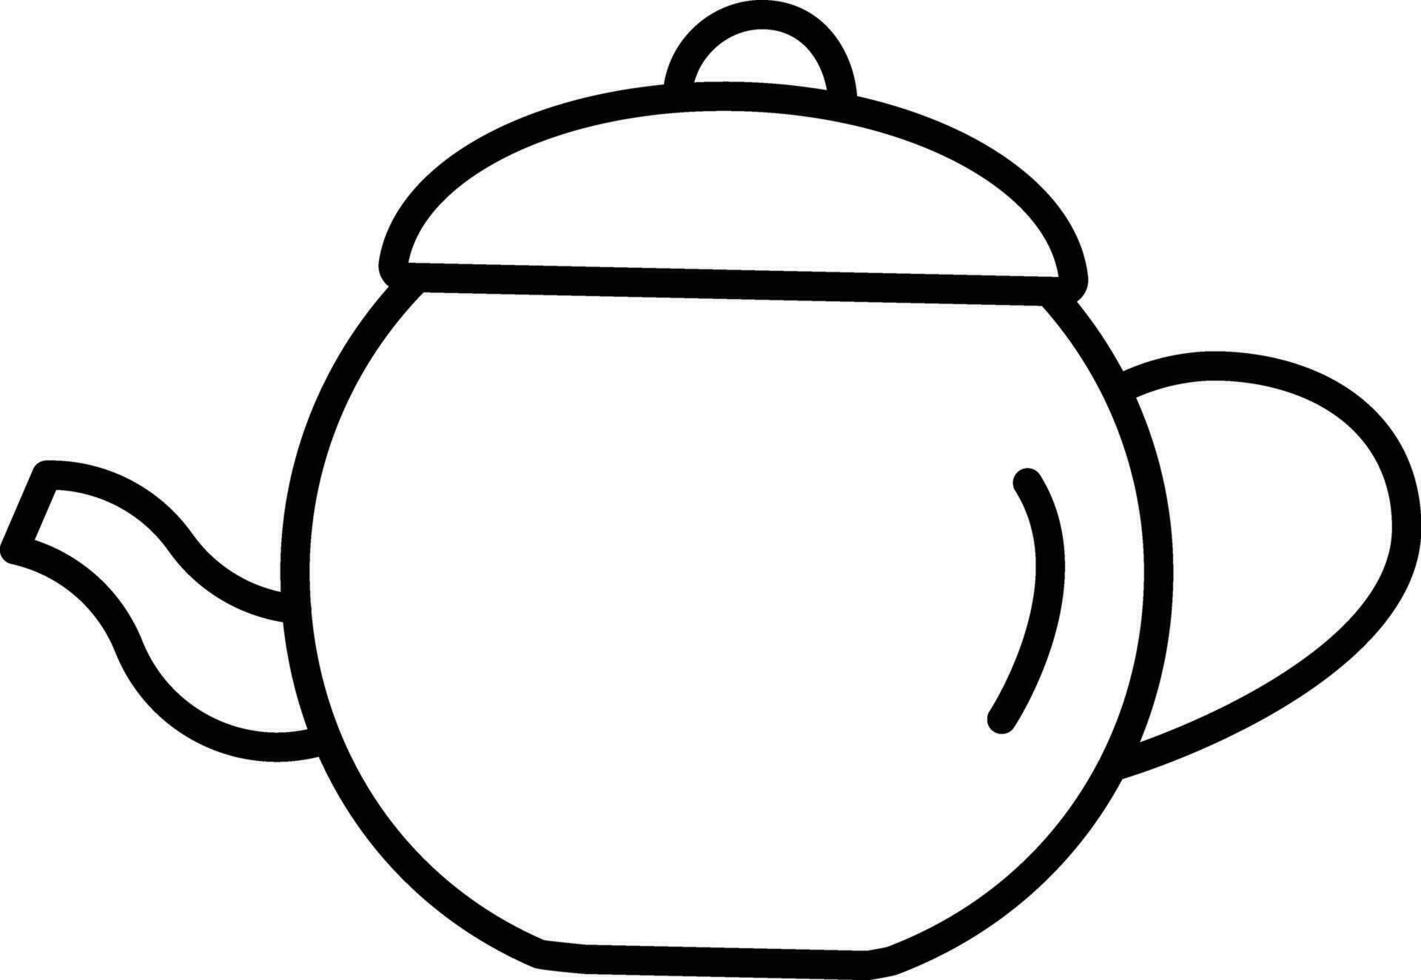 Coffee Kettle Outline vector illustration icon